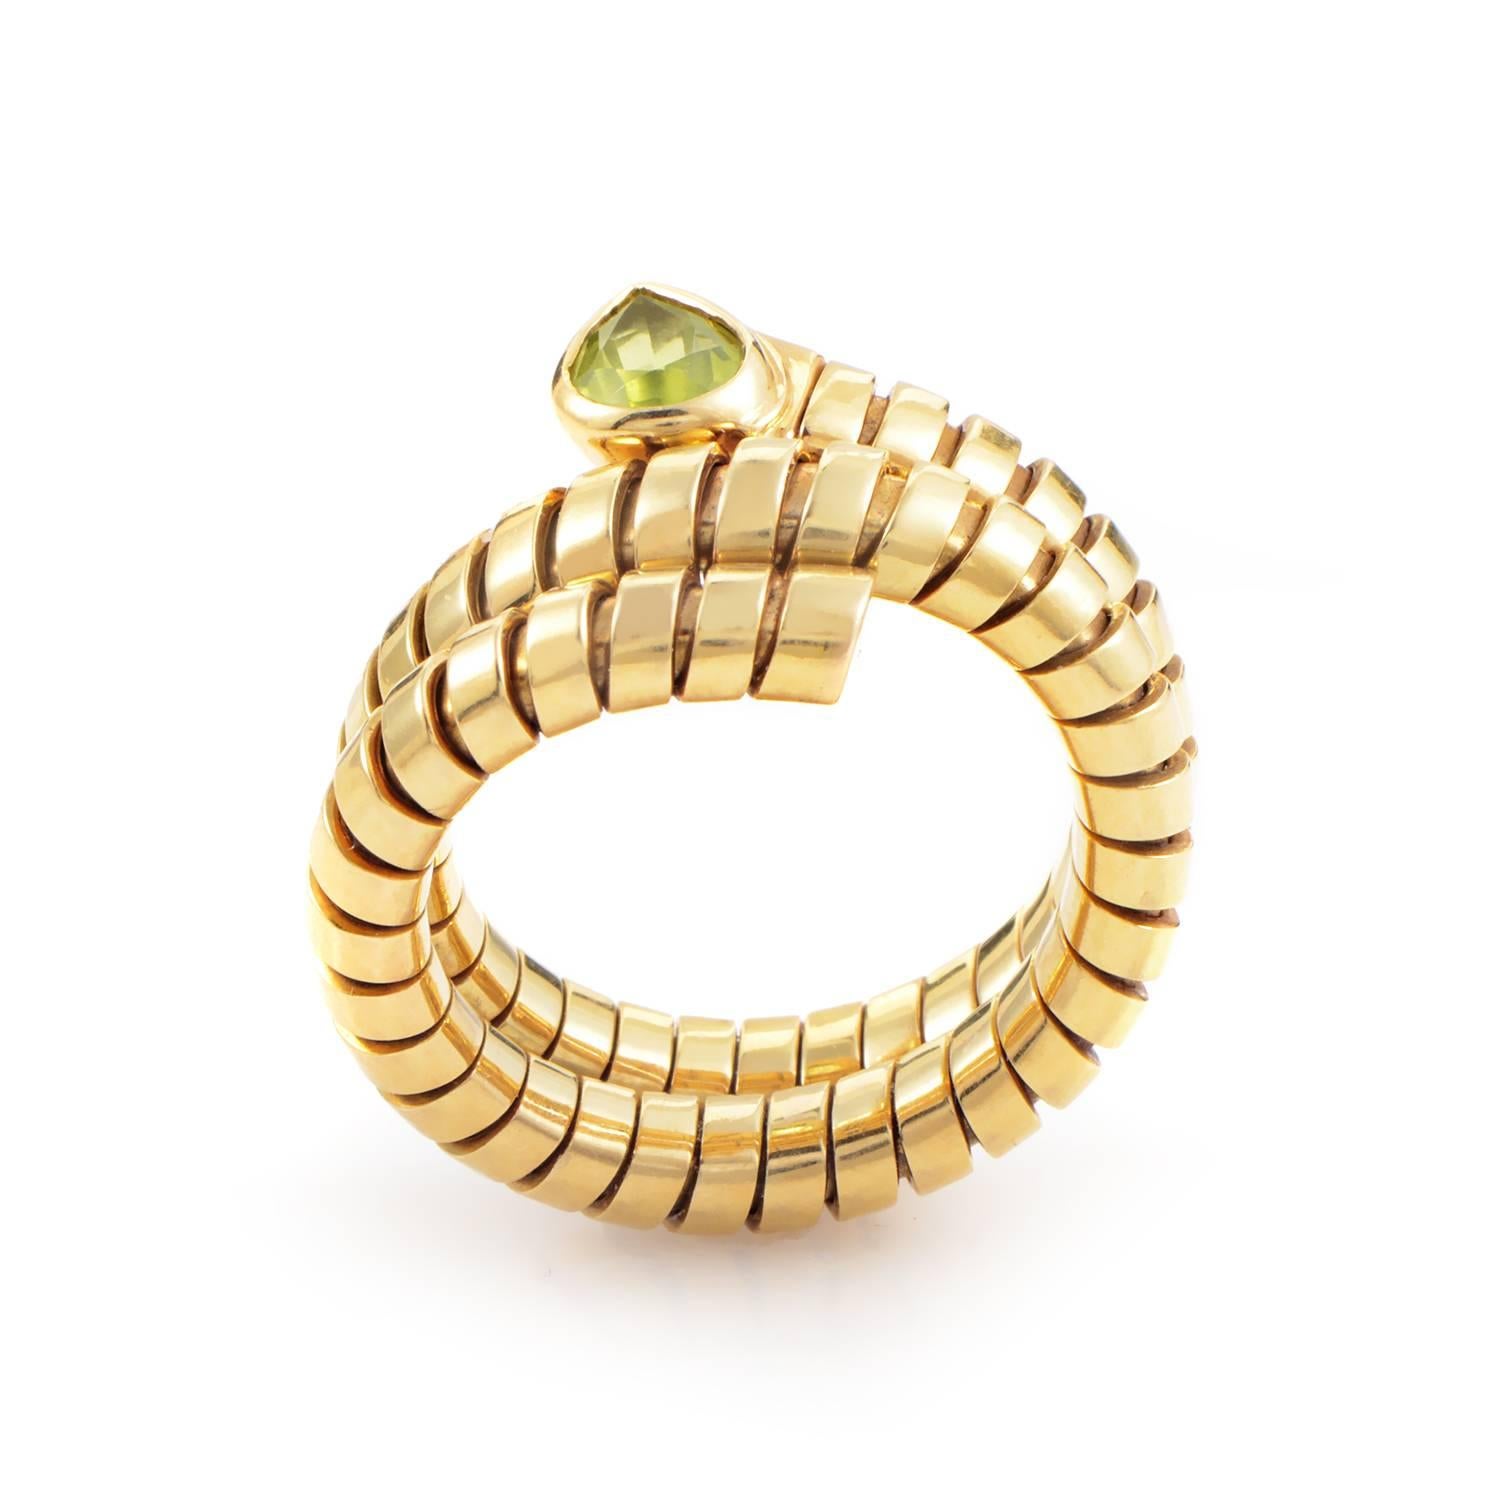 With serpentine sleekness this Tubogas ring wraps snugly three times in a glamorous grasp of 18K yellow gold. Leading this rivulet of precious slivers is the ripe setting of peridot that punctuates the ring's rippling curves. Compelling style and